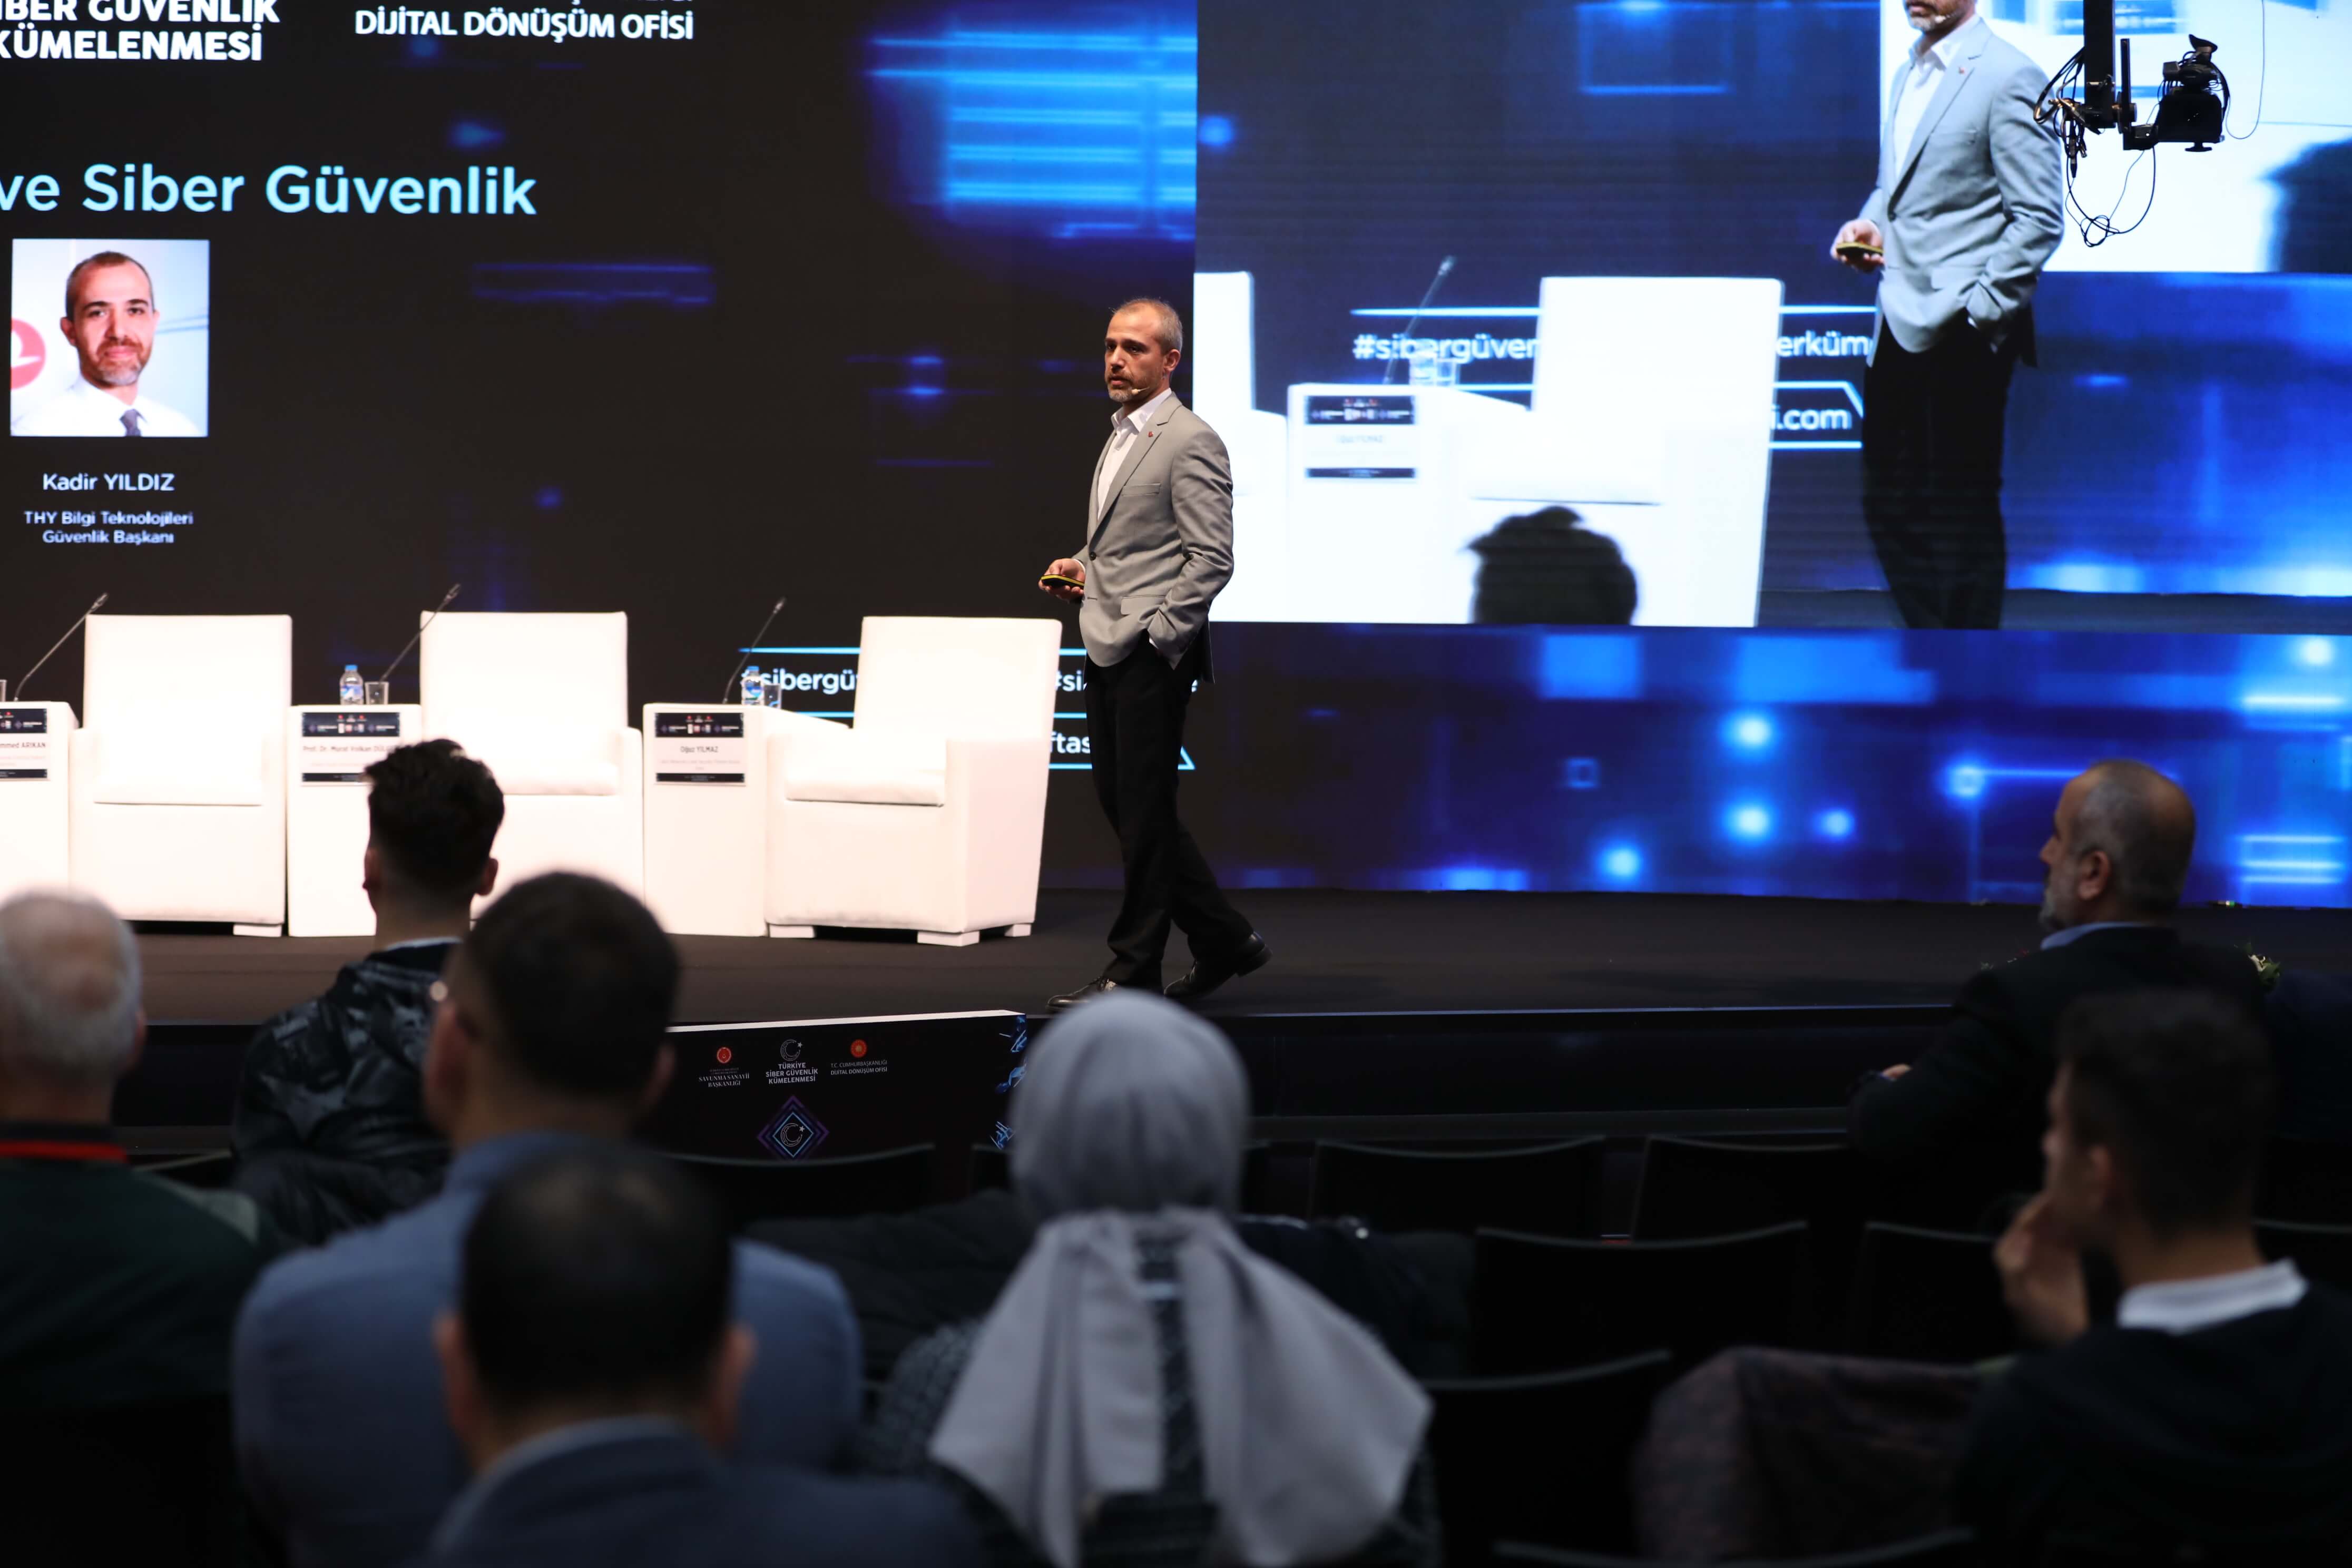 Turkish Technology Attends Cyber Security Week Event